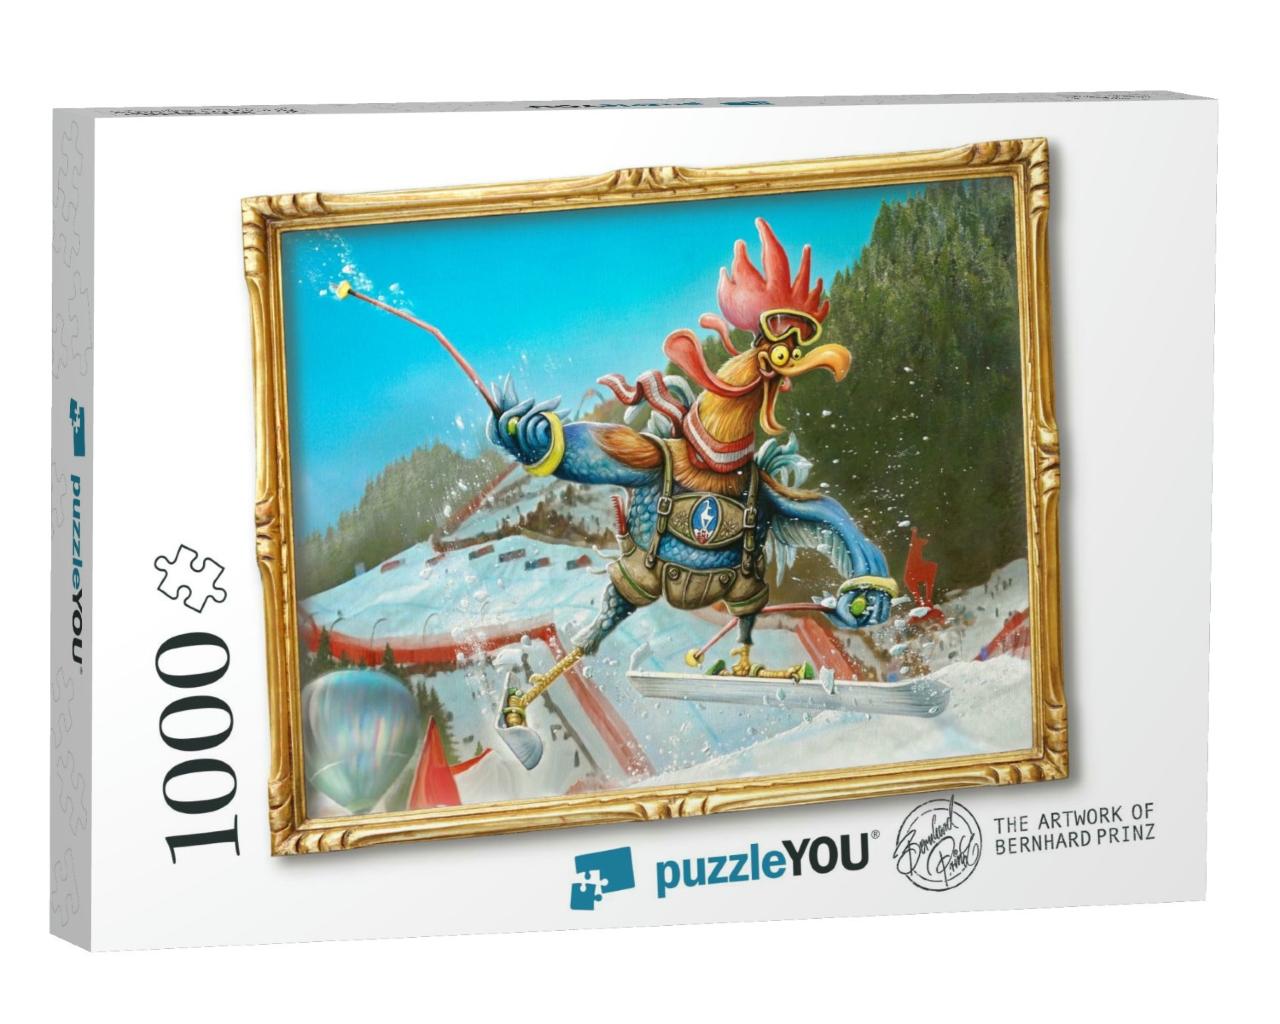 Rooster Downhill Ski Race Jigsaw Puzzle with 1000 pieces